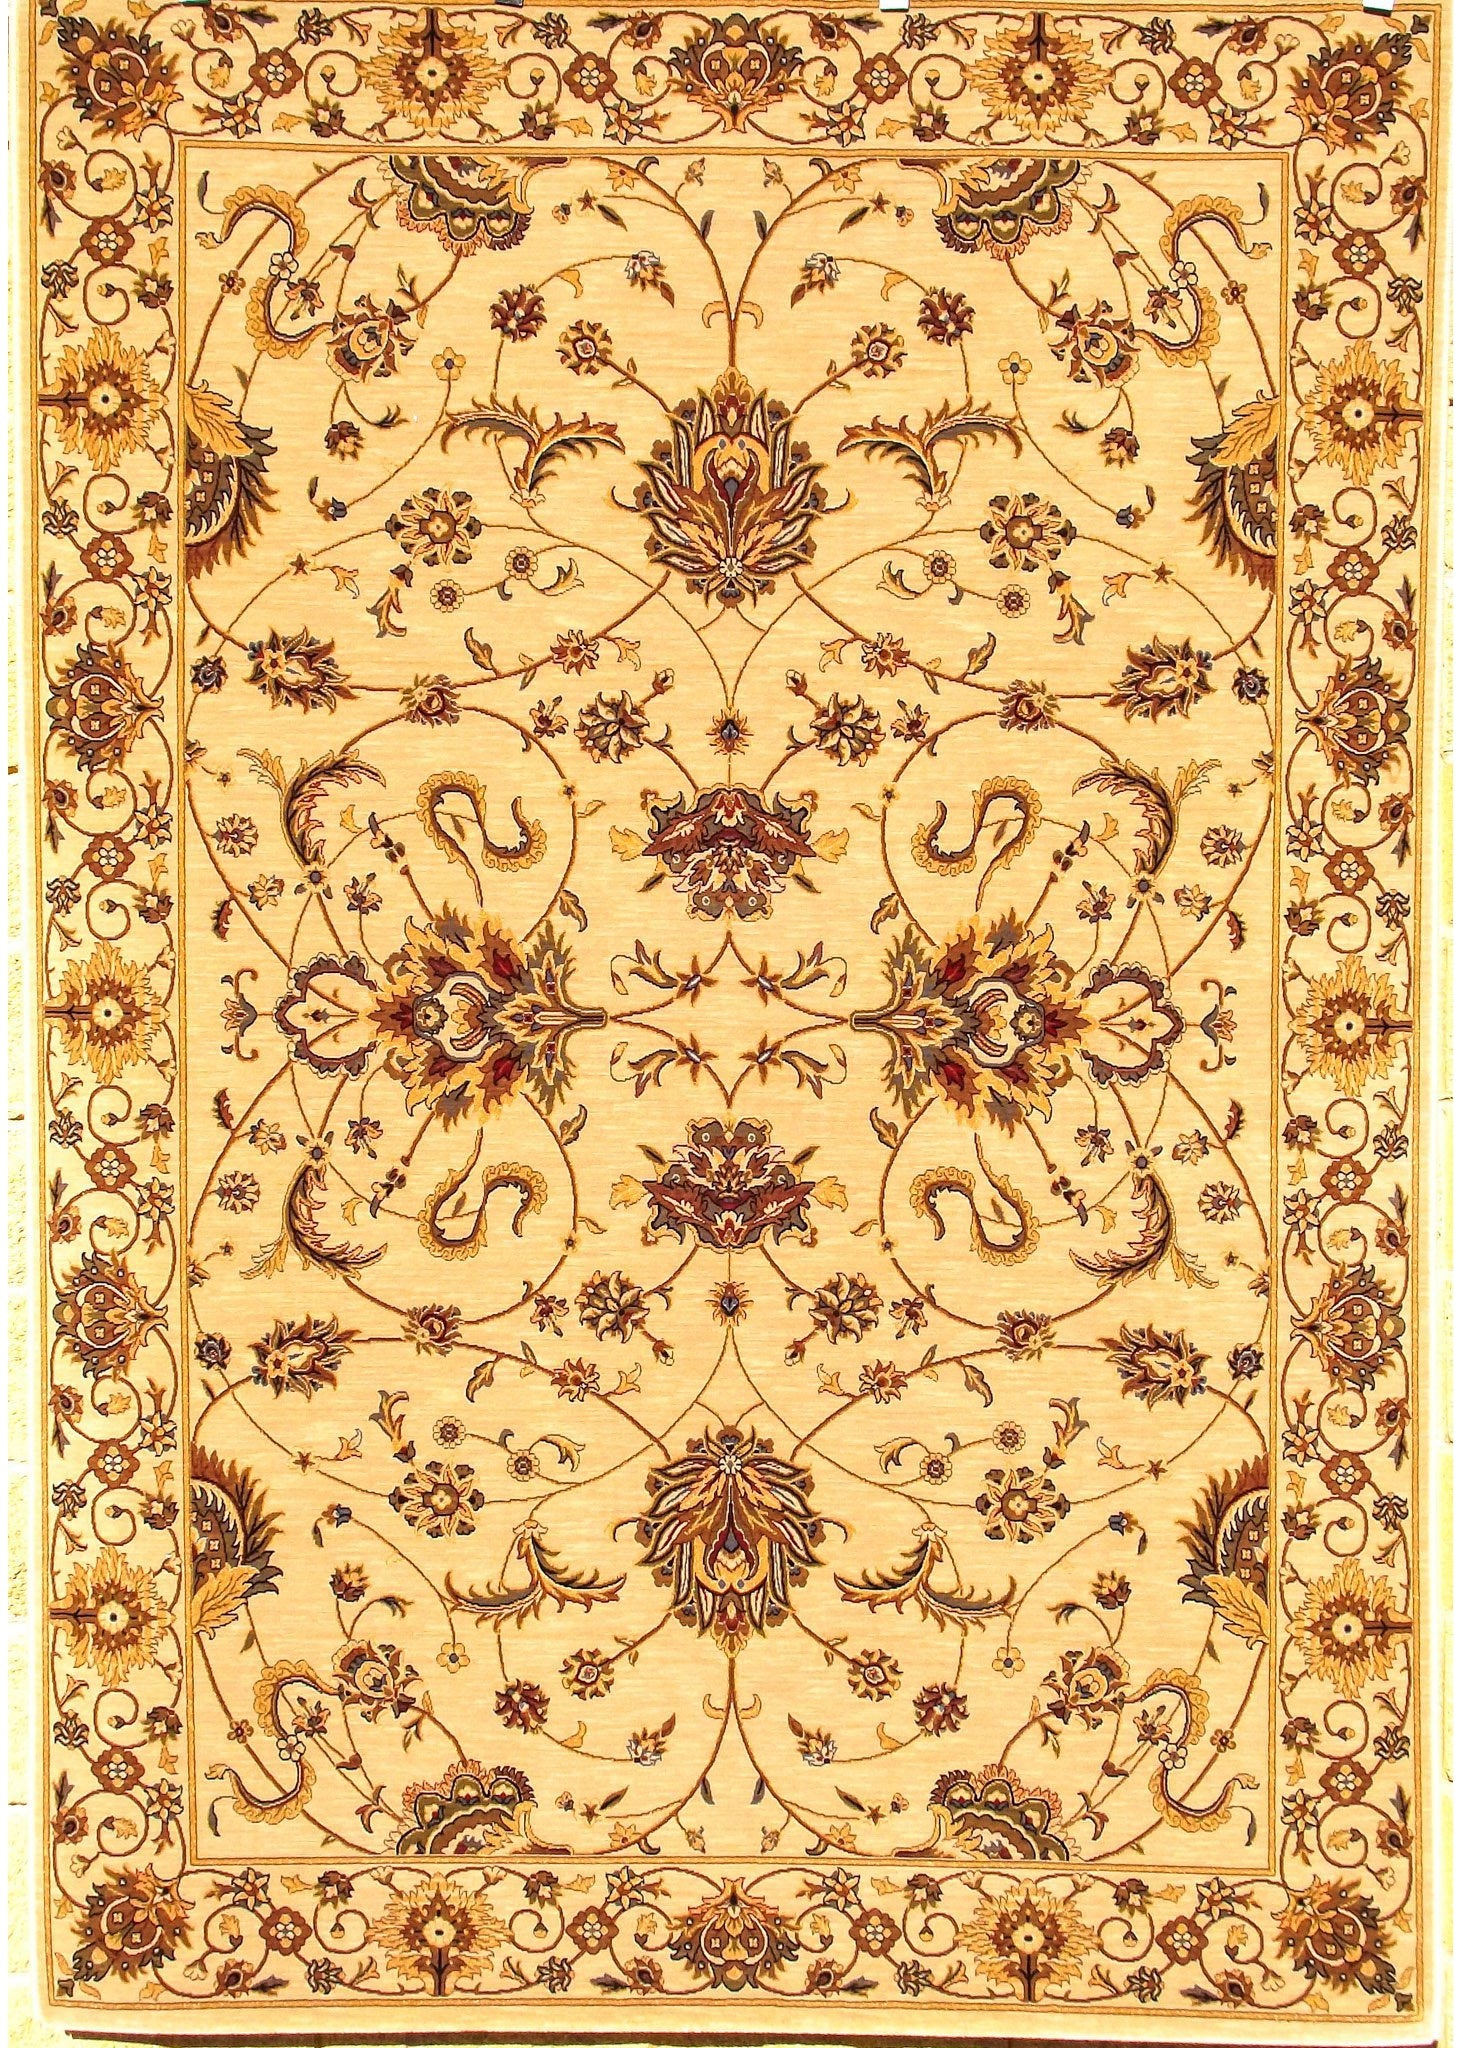 Kenouz Woven Rug-Area rug for living room, dining area, and bedroom